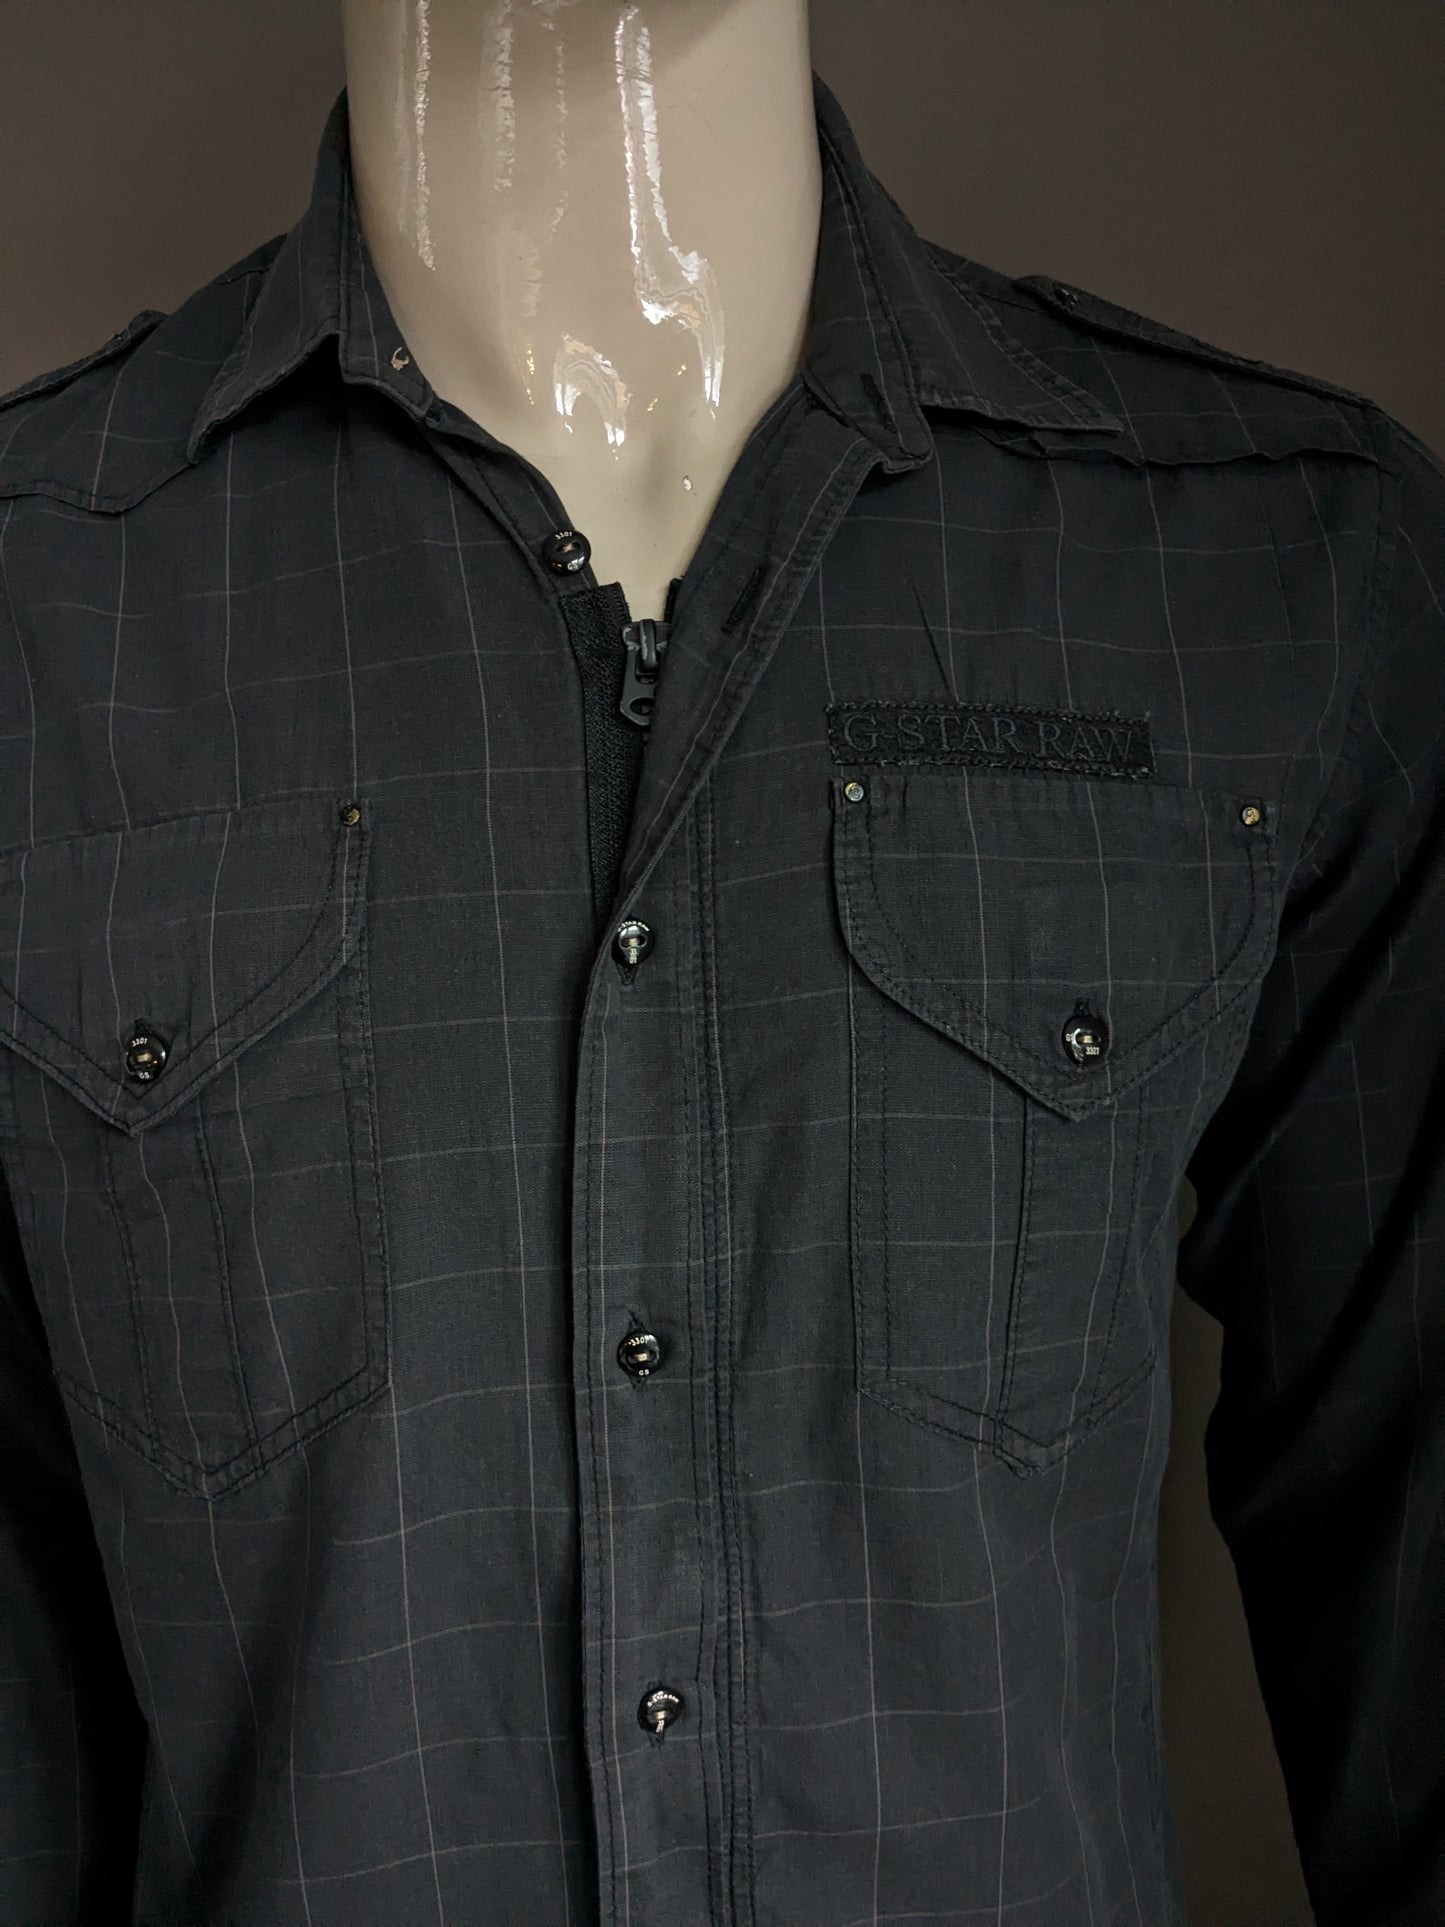 G-Star Raw shirt. With zipper and knots. Black gray checkered. Size L.